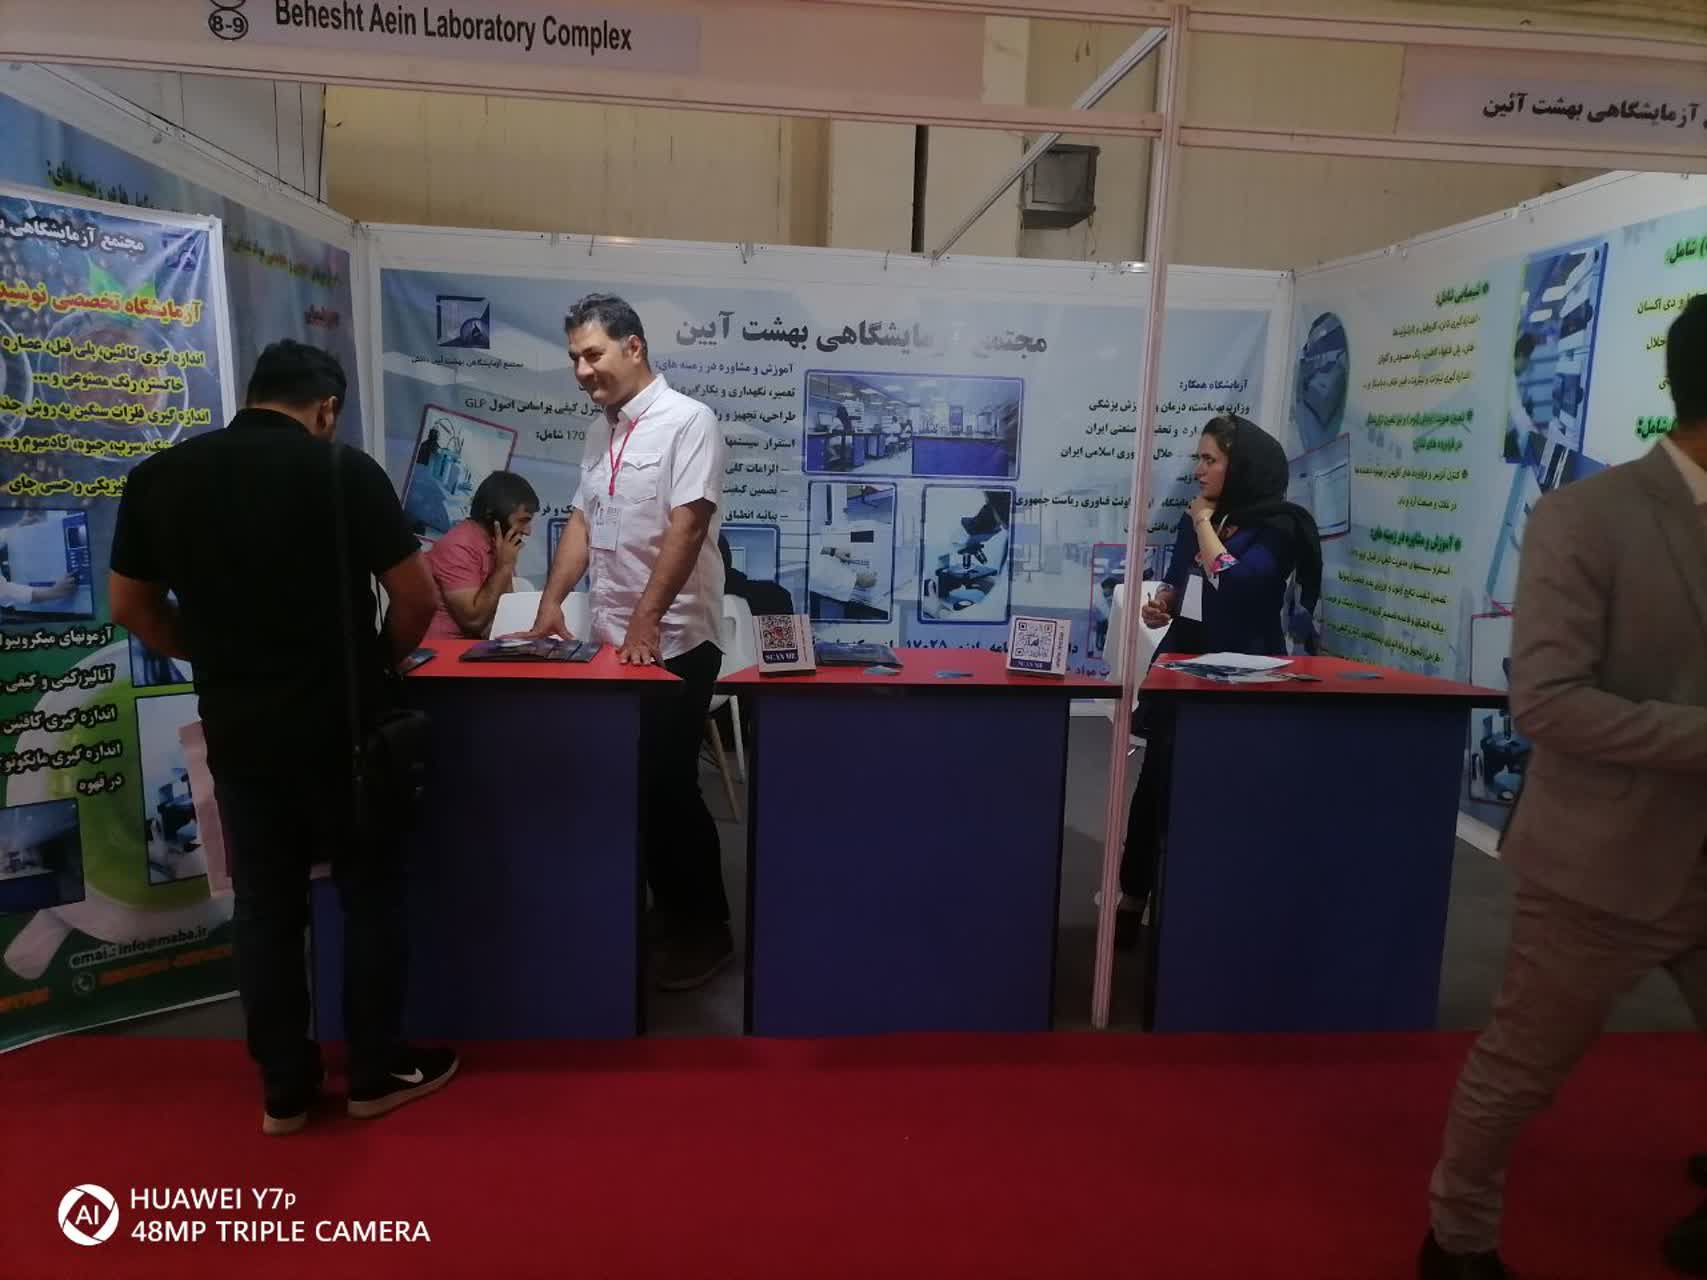 The presence of Behesht Ayin laboratory complex in the 10th international exhibition